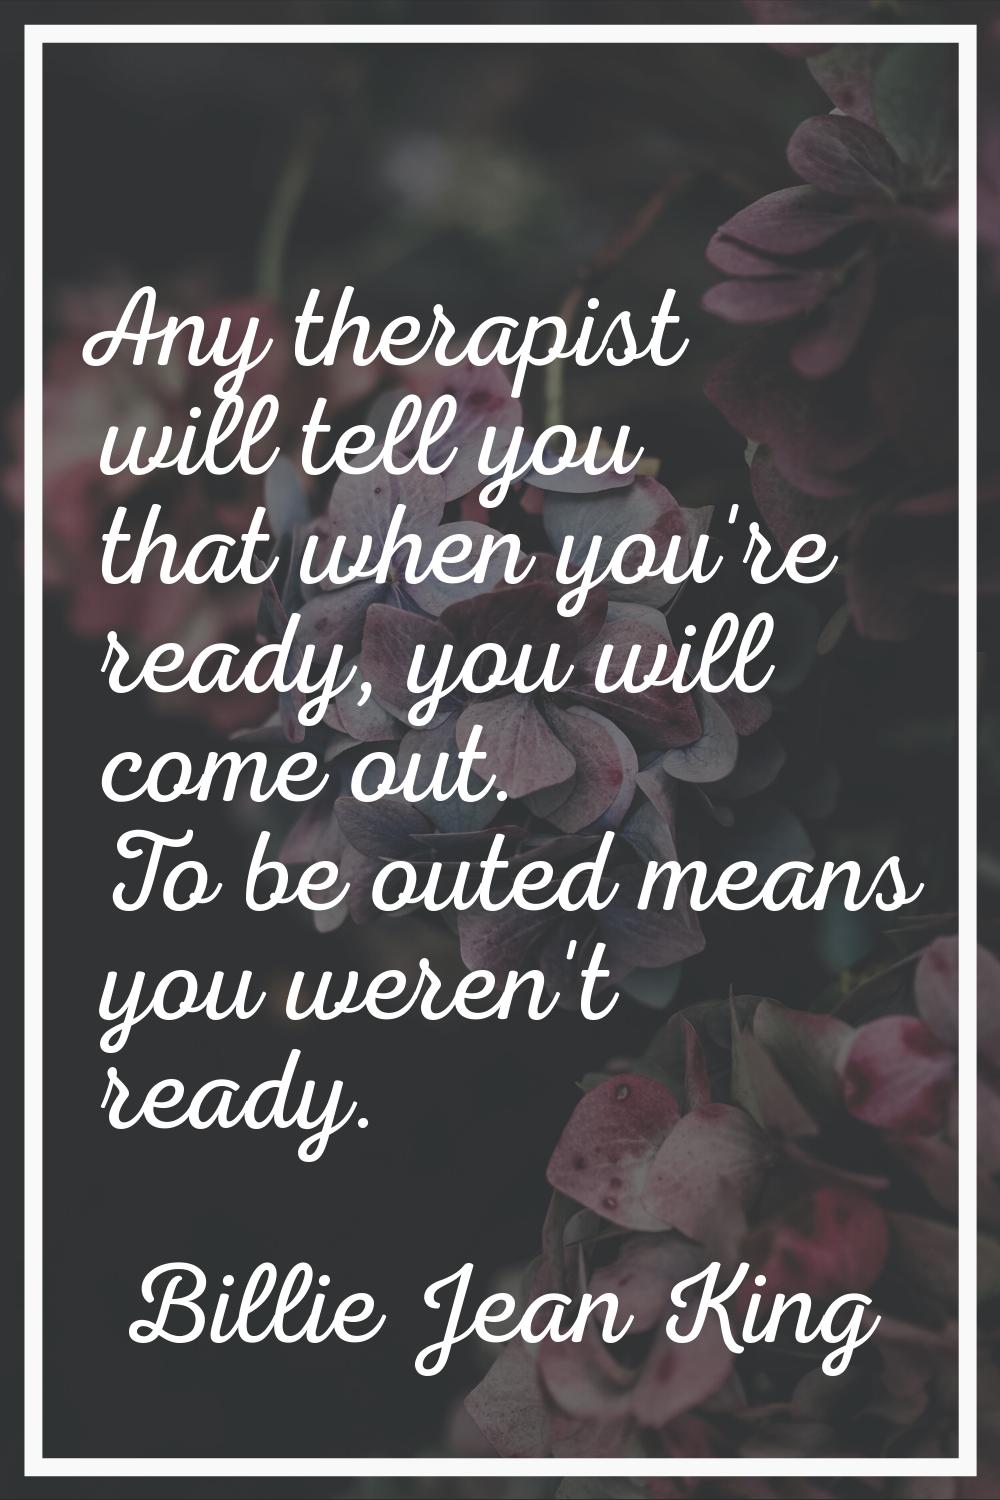 Any therapist will tell you that when you're ready, you will come out. To be outed means you weren'